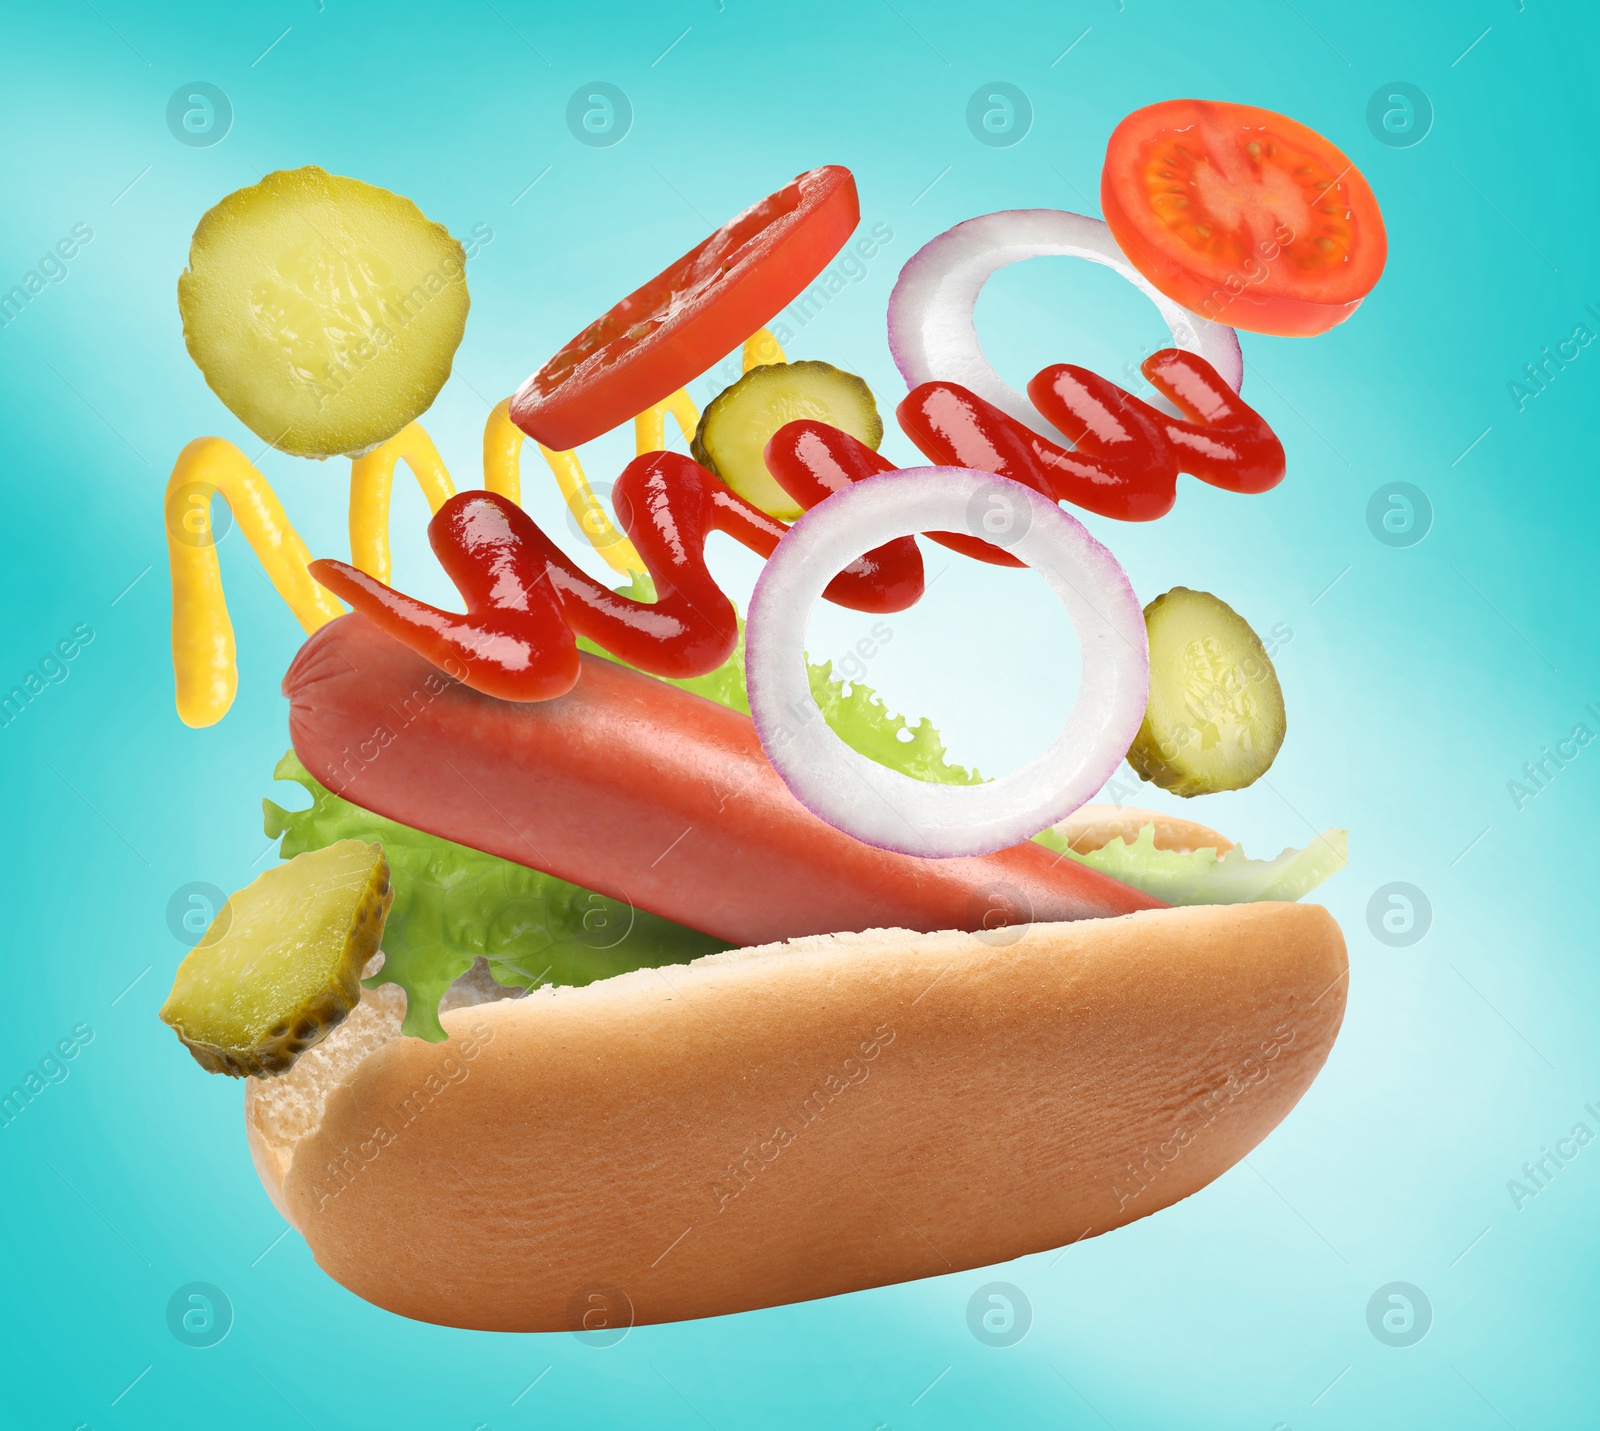 Image of Hot dog ingredients in air on light blue gradient background